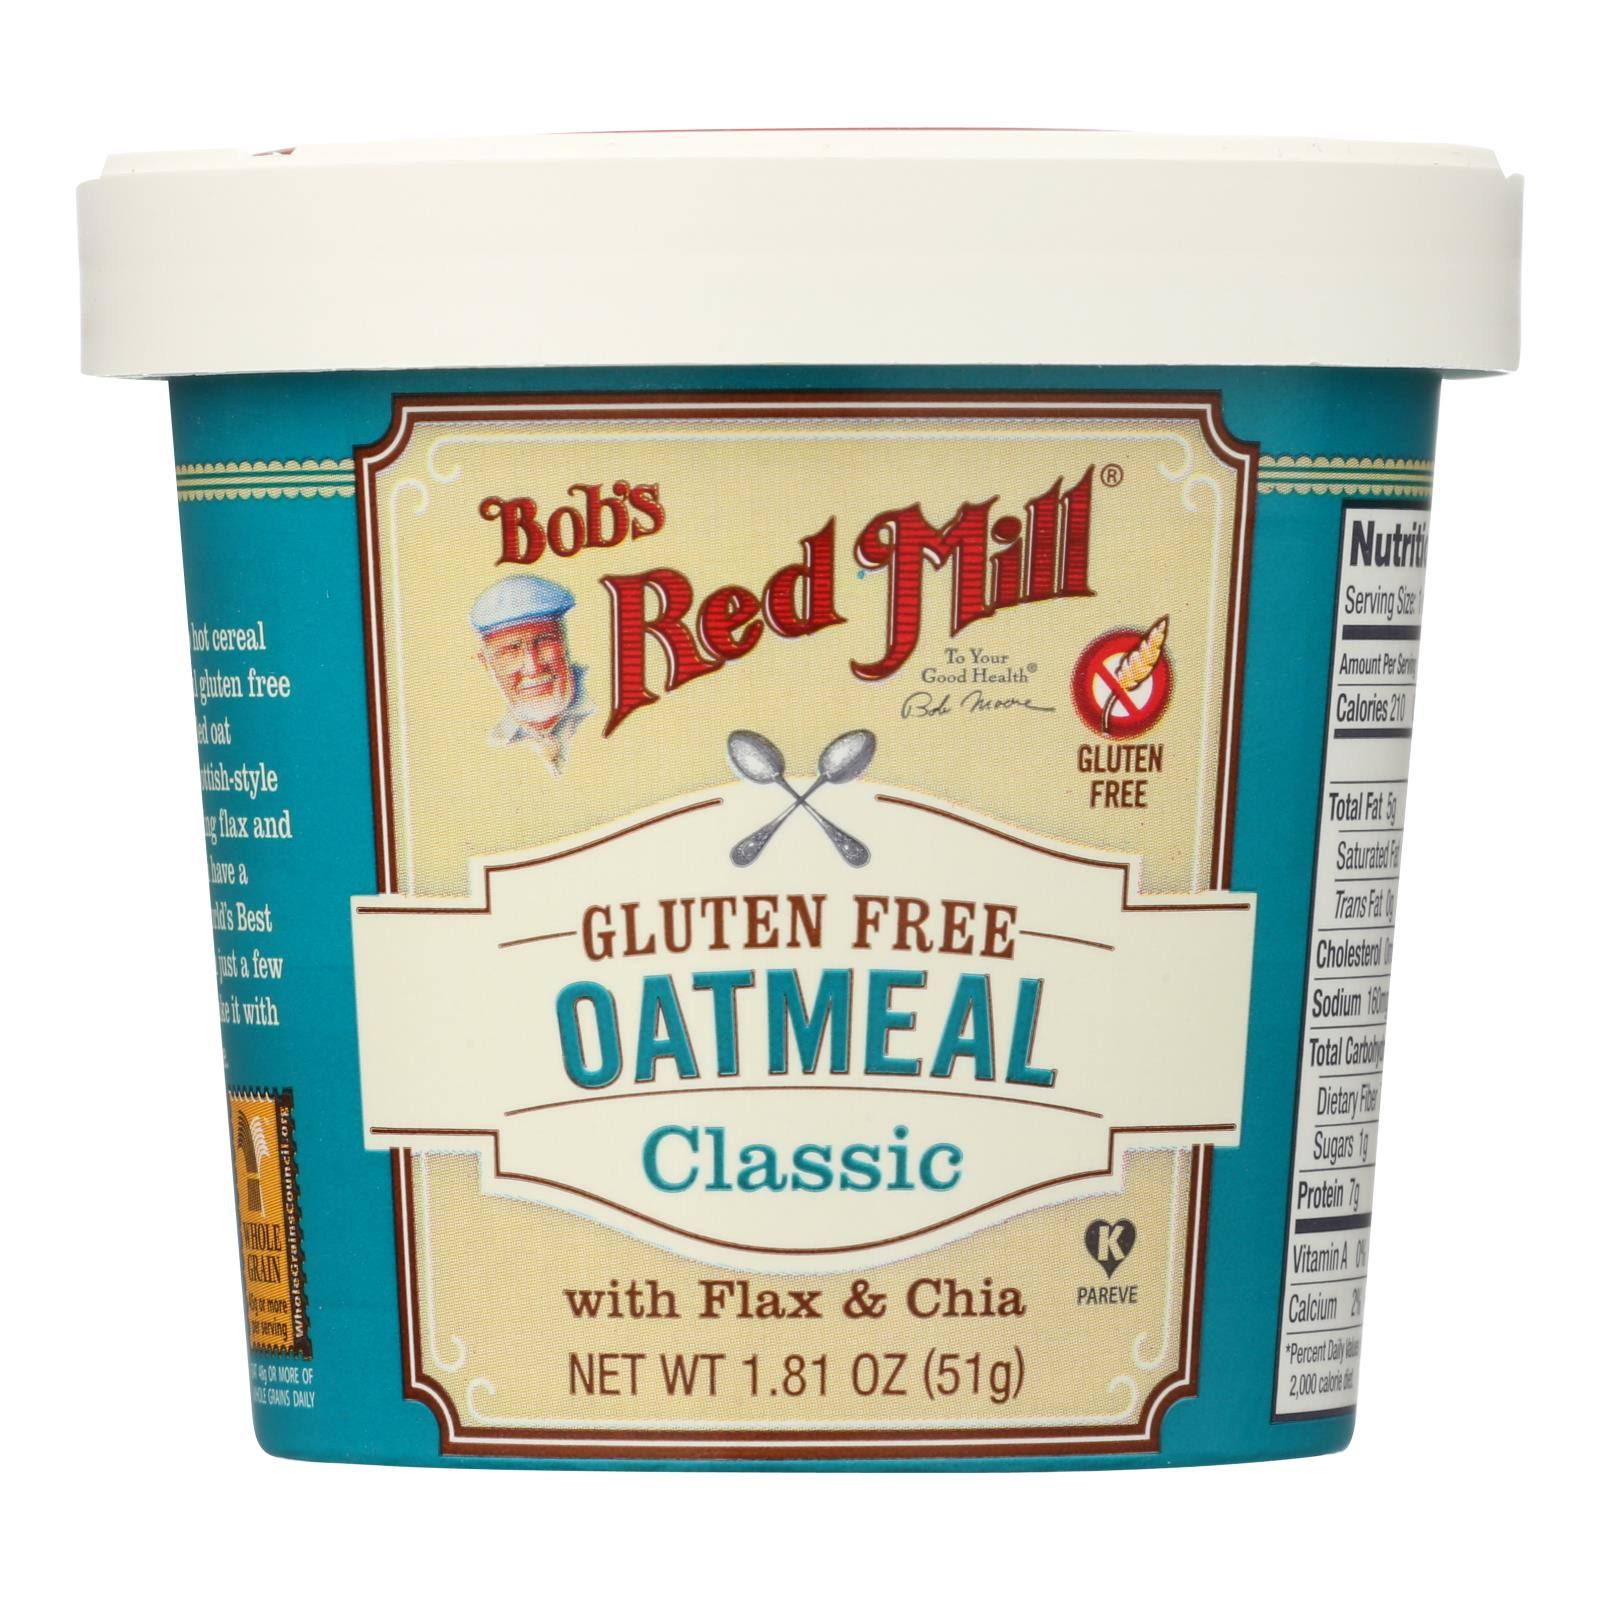 Bobs Red Mill Oatmeal Cup - Classic, 1.81oz